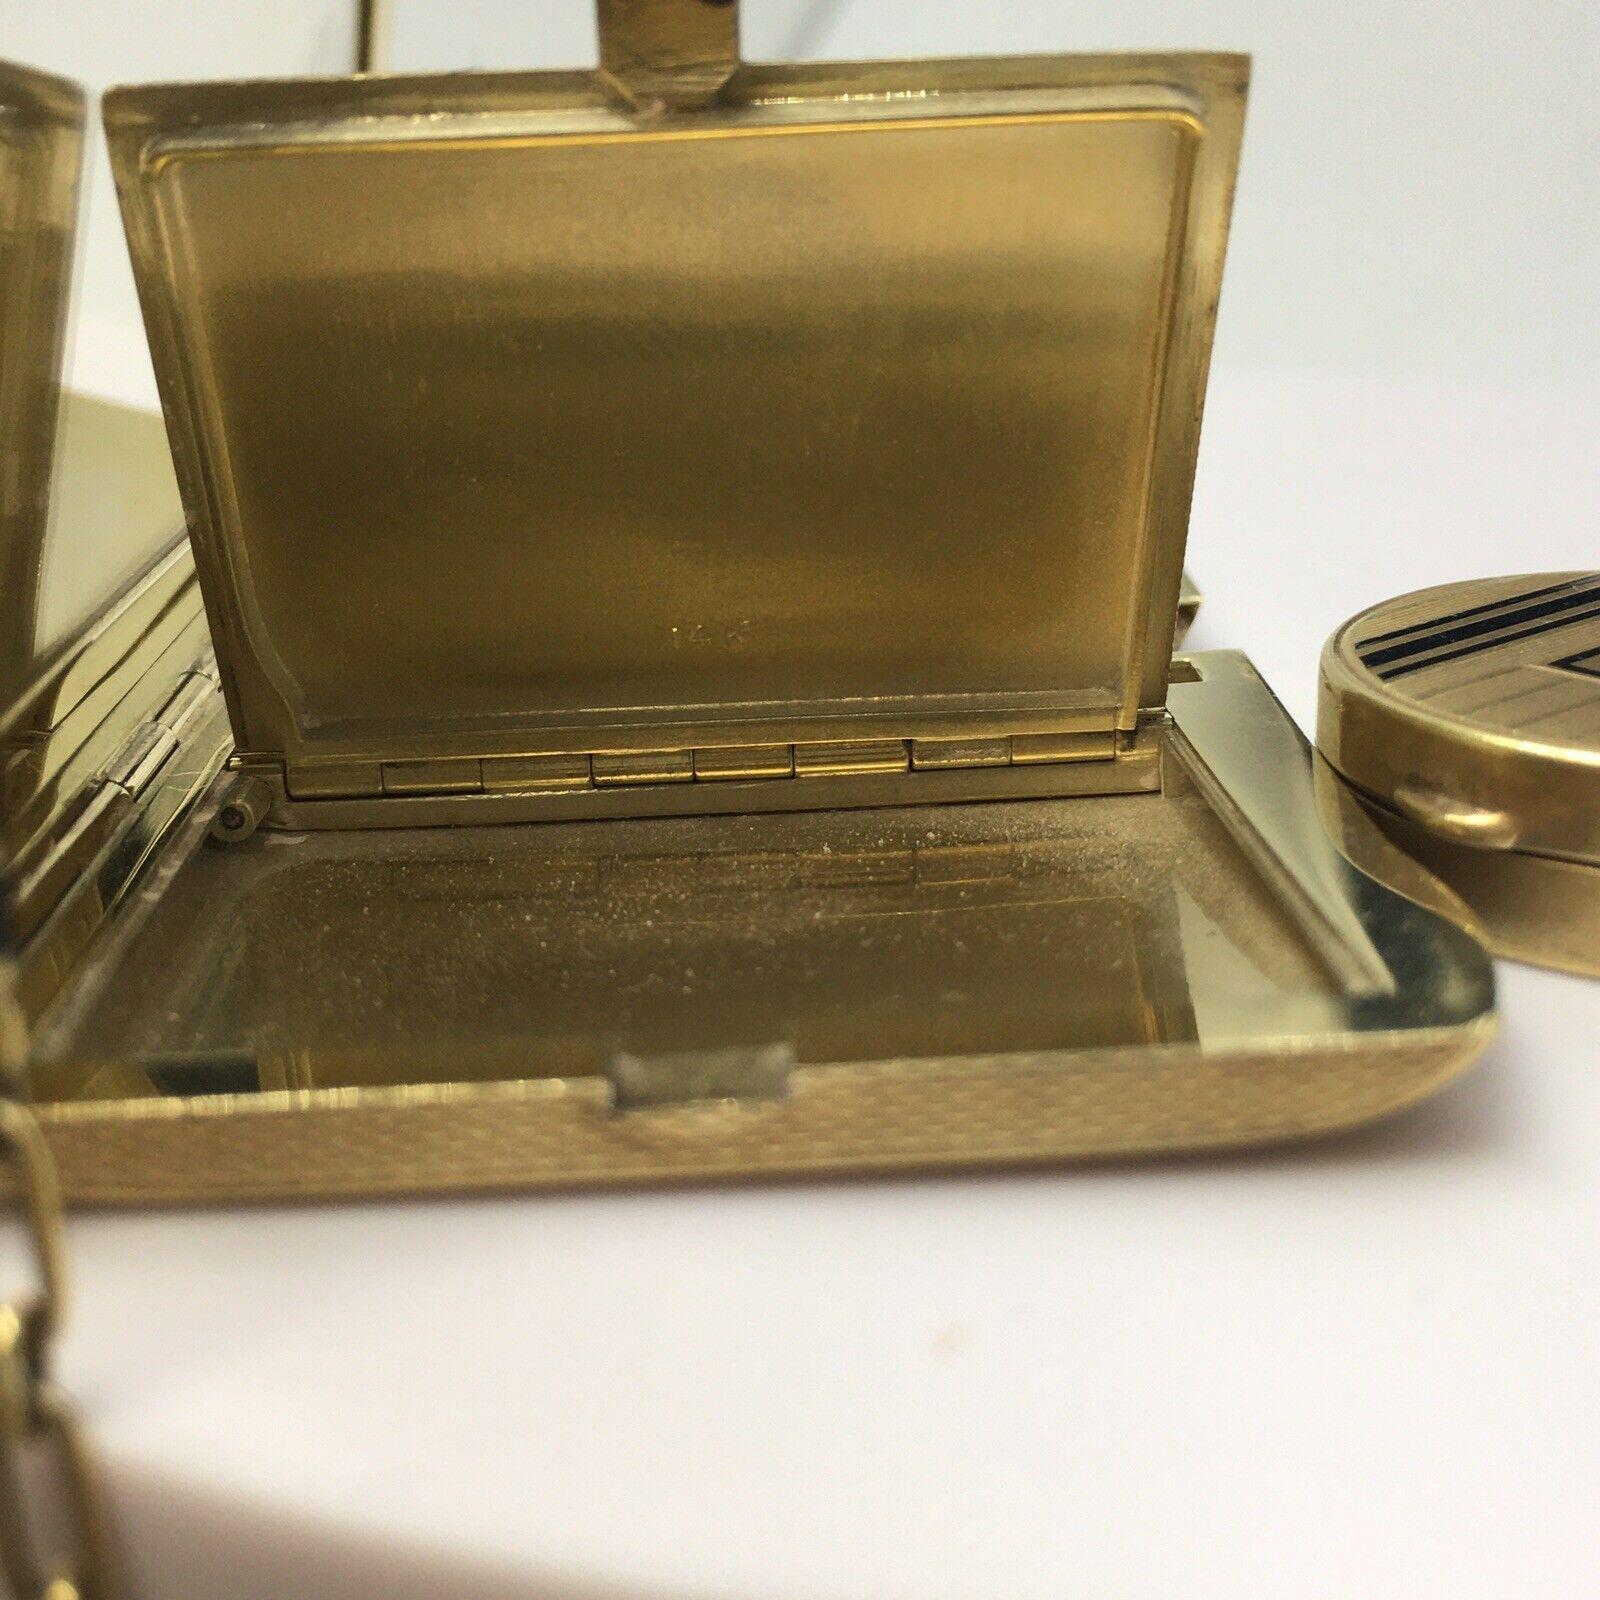 Women's Art Deco 14K GOLD Makeup Case Compact Powder Rouge 1930s American made 99.2 Gr For Sale